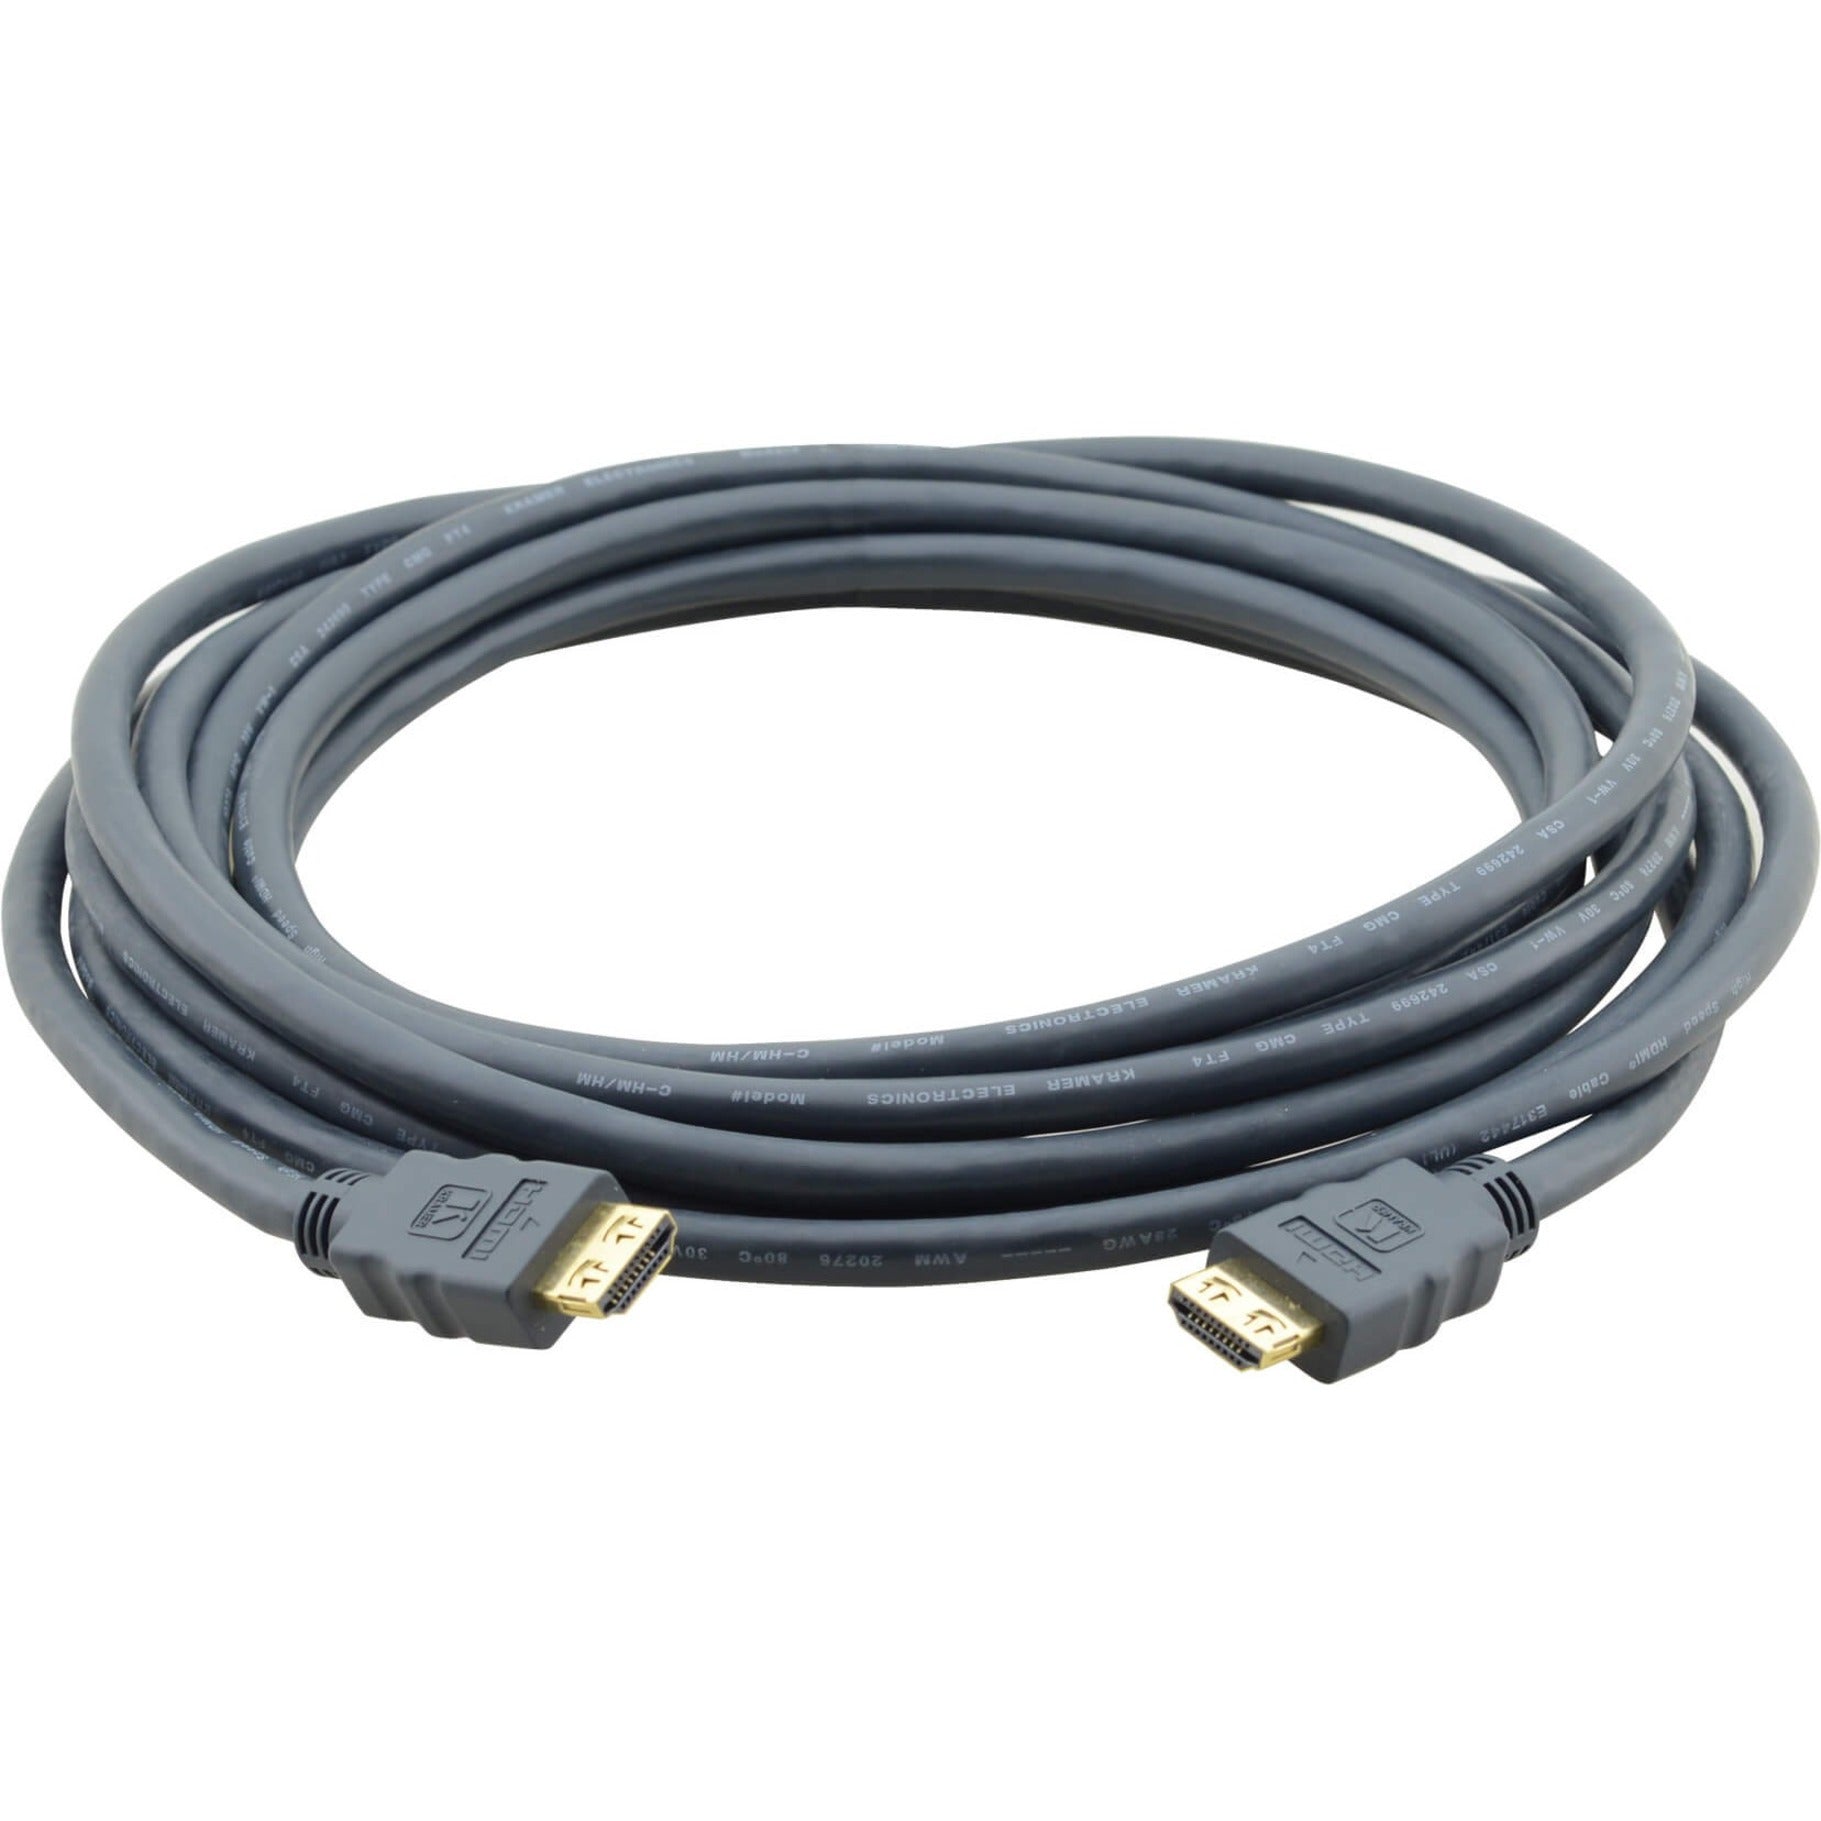 Kramer 97-01213003 High-Speed/Standard HDMI Cable with Ethernet, 3 ft, Gold-Plated Connectors, 4K Ultra HD Support